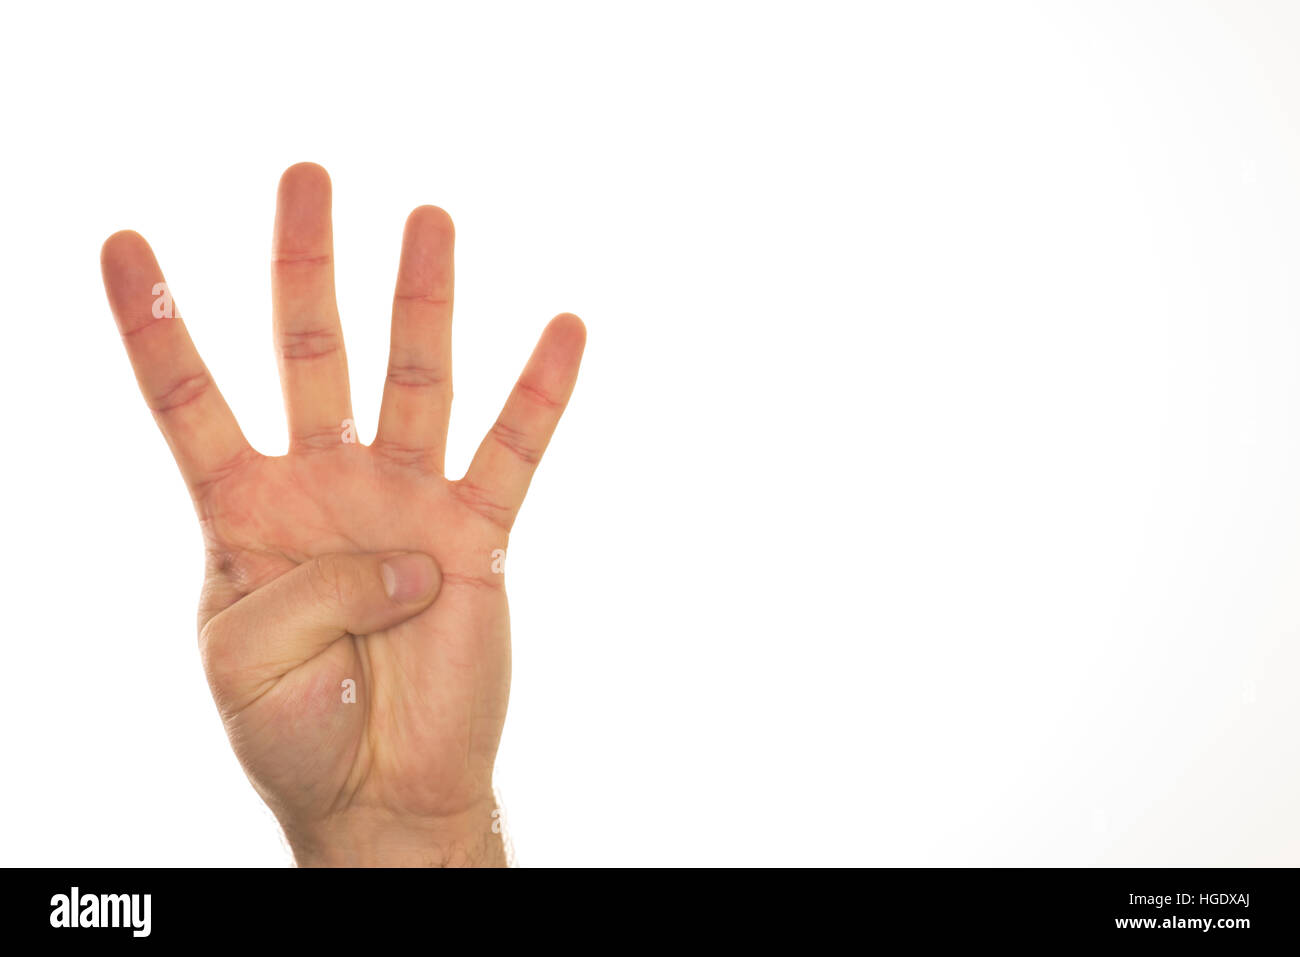 Hand showing four fingers for counting and indicating numbers. Stock Photo